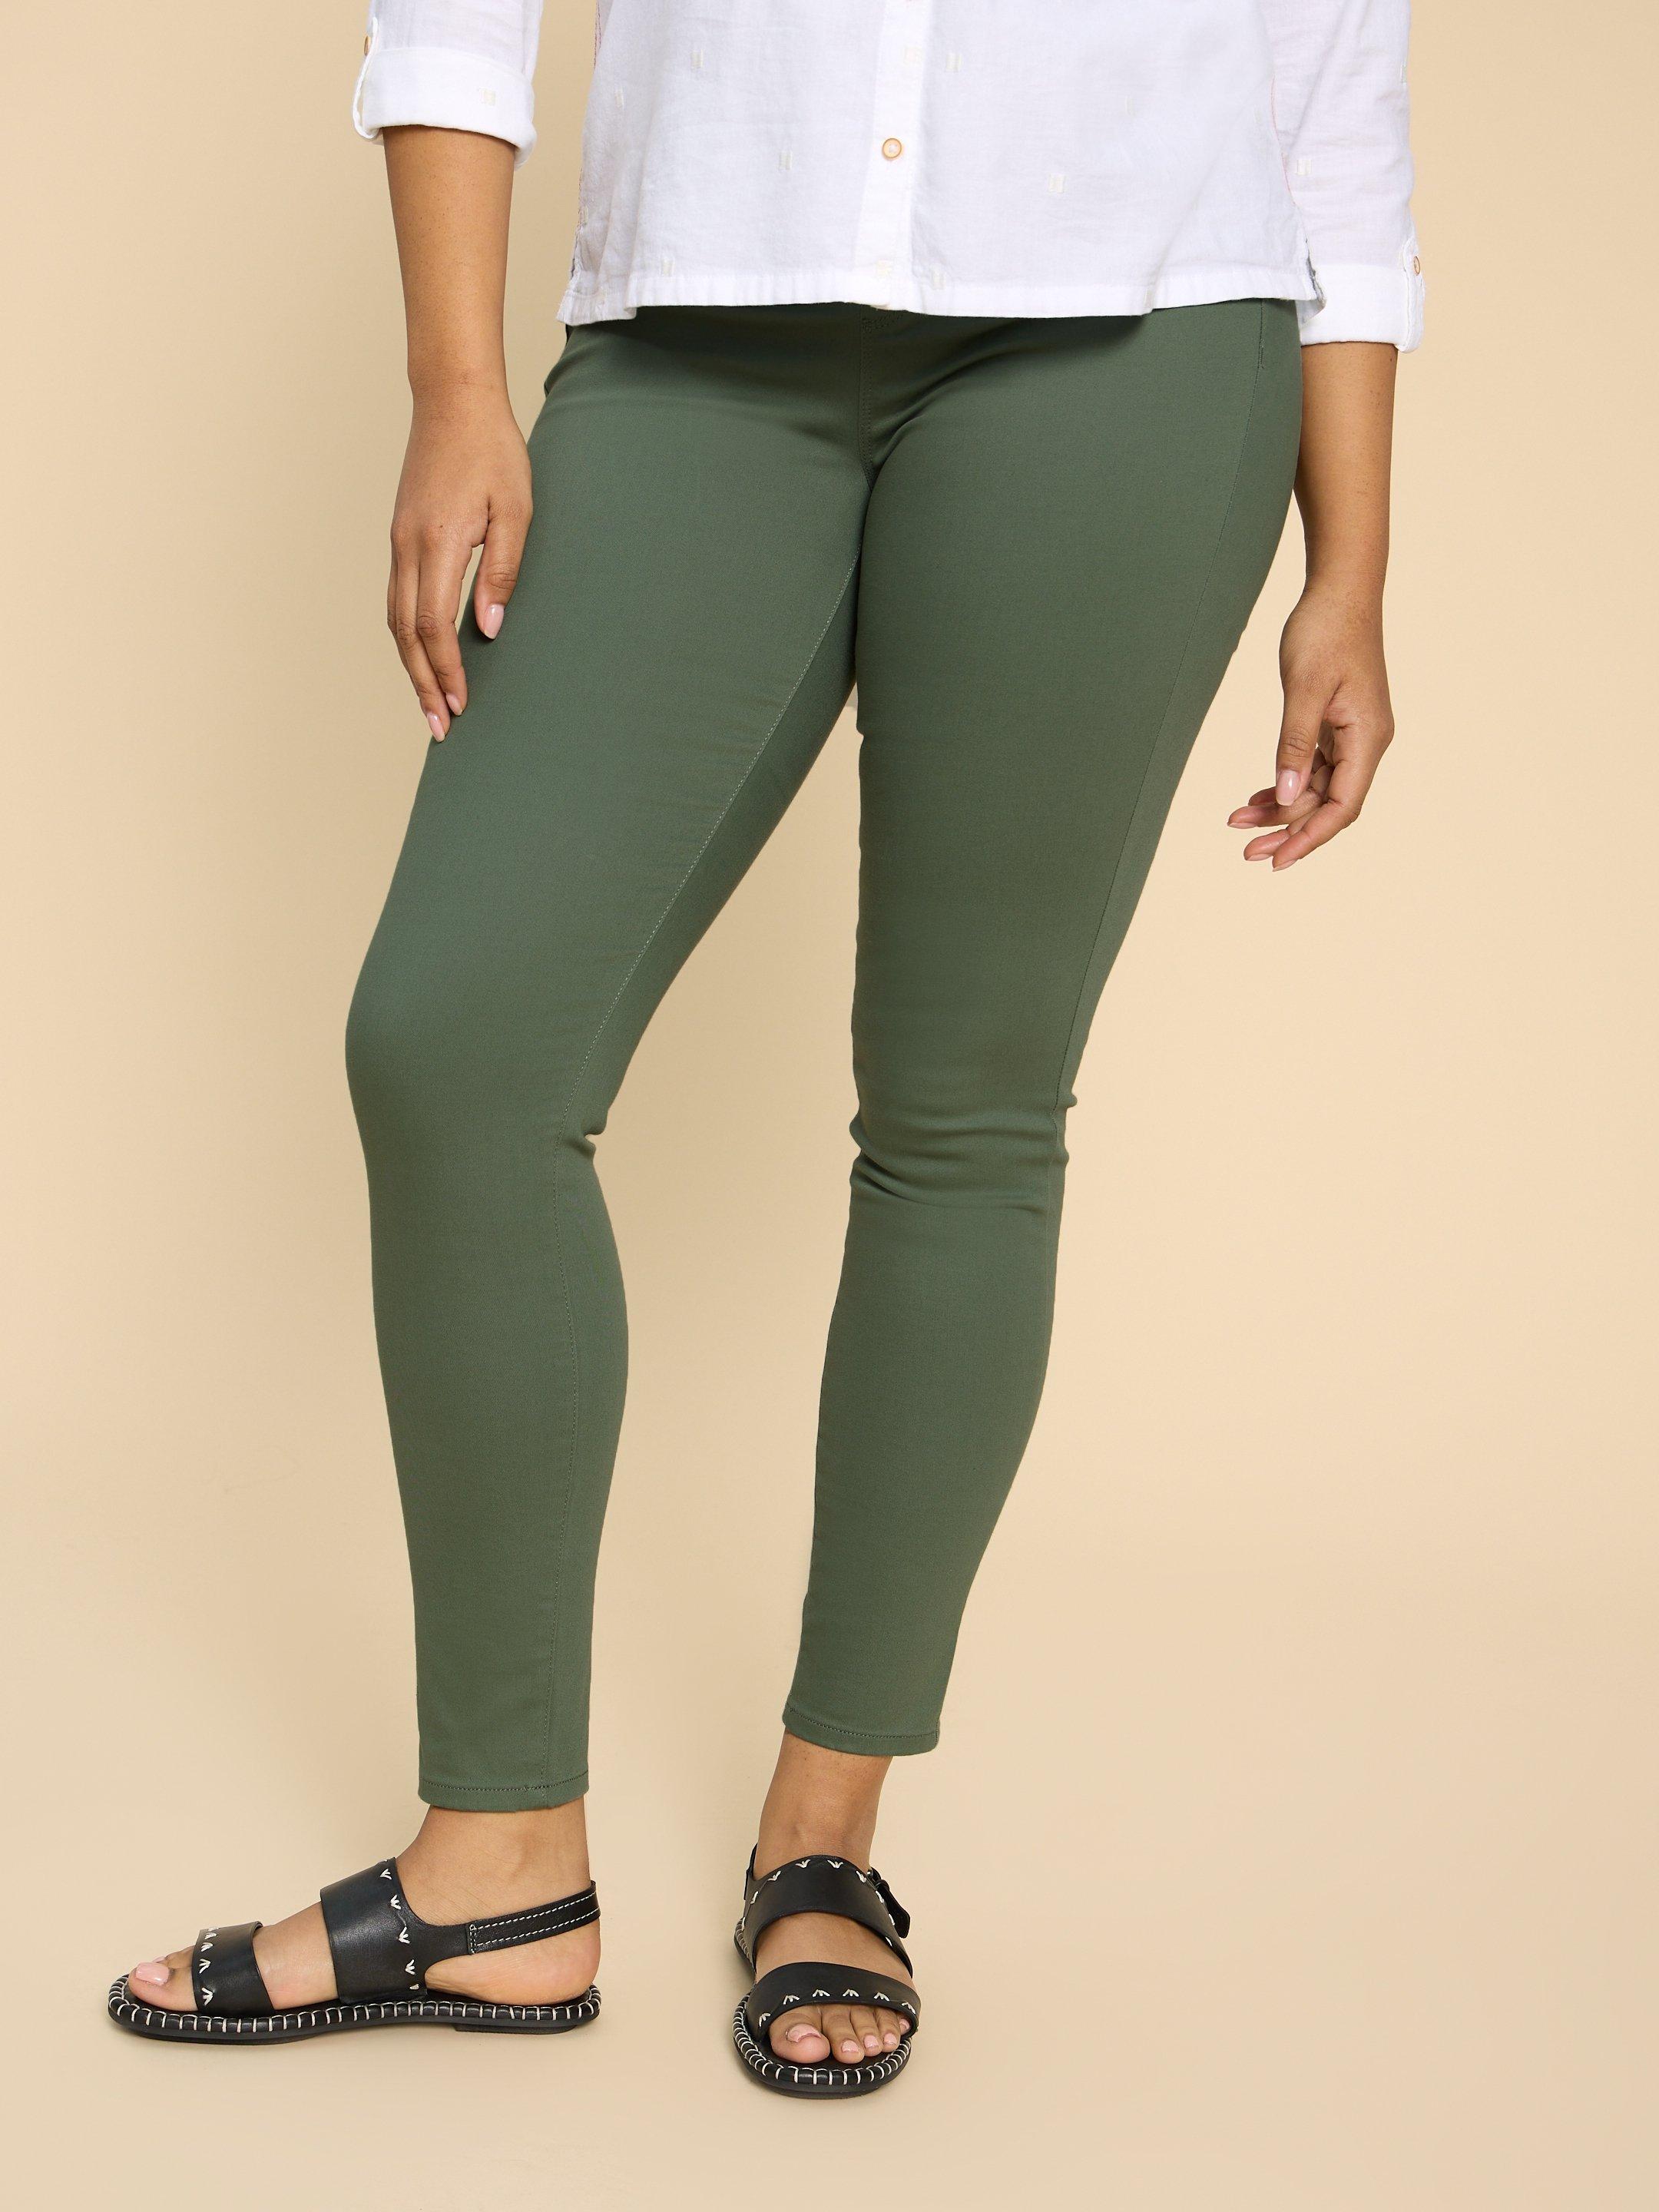 Janey Cotton Jegging in MID GREEN - MODEL DETAIL